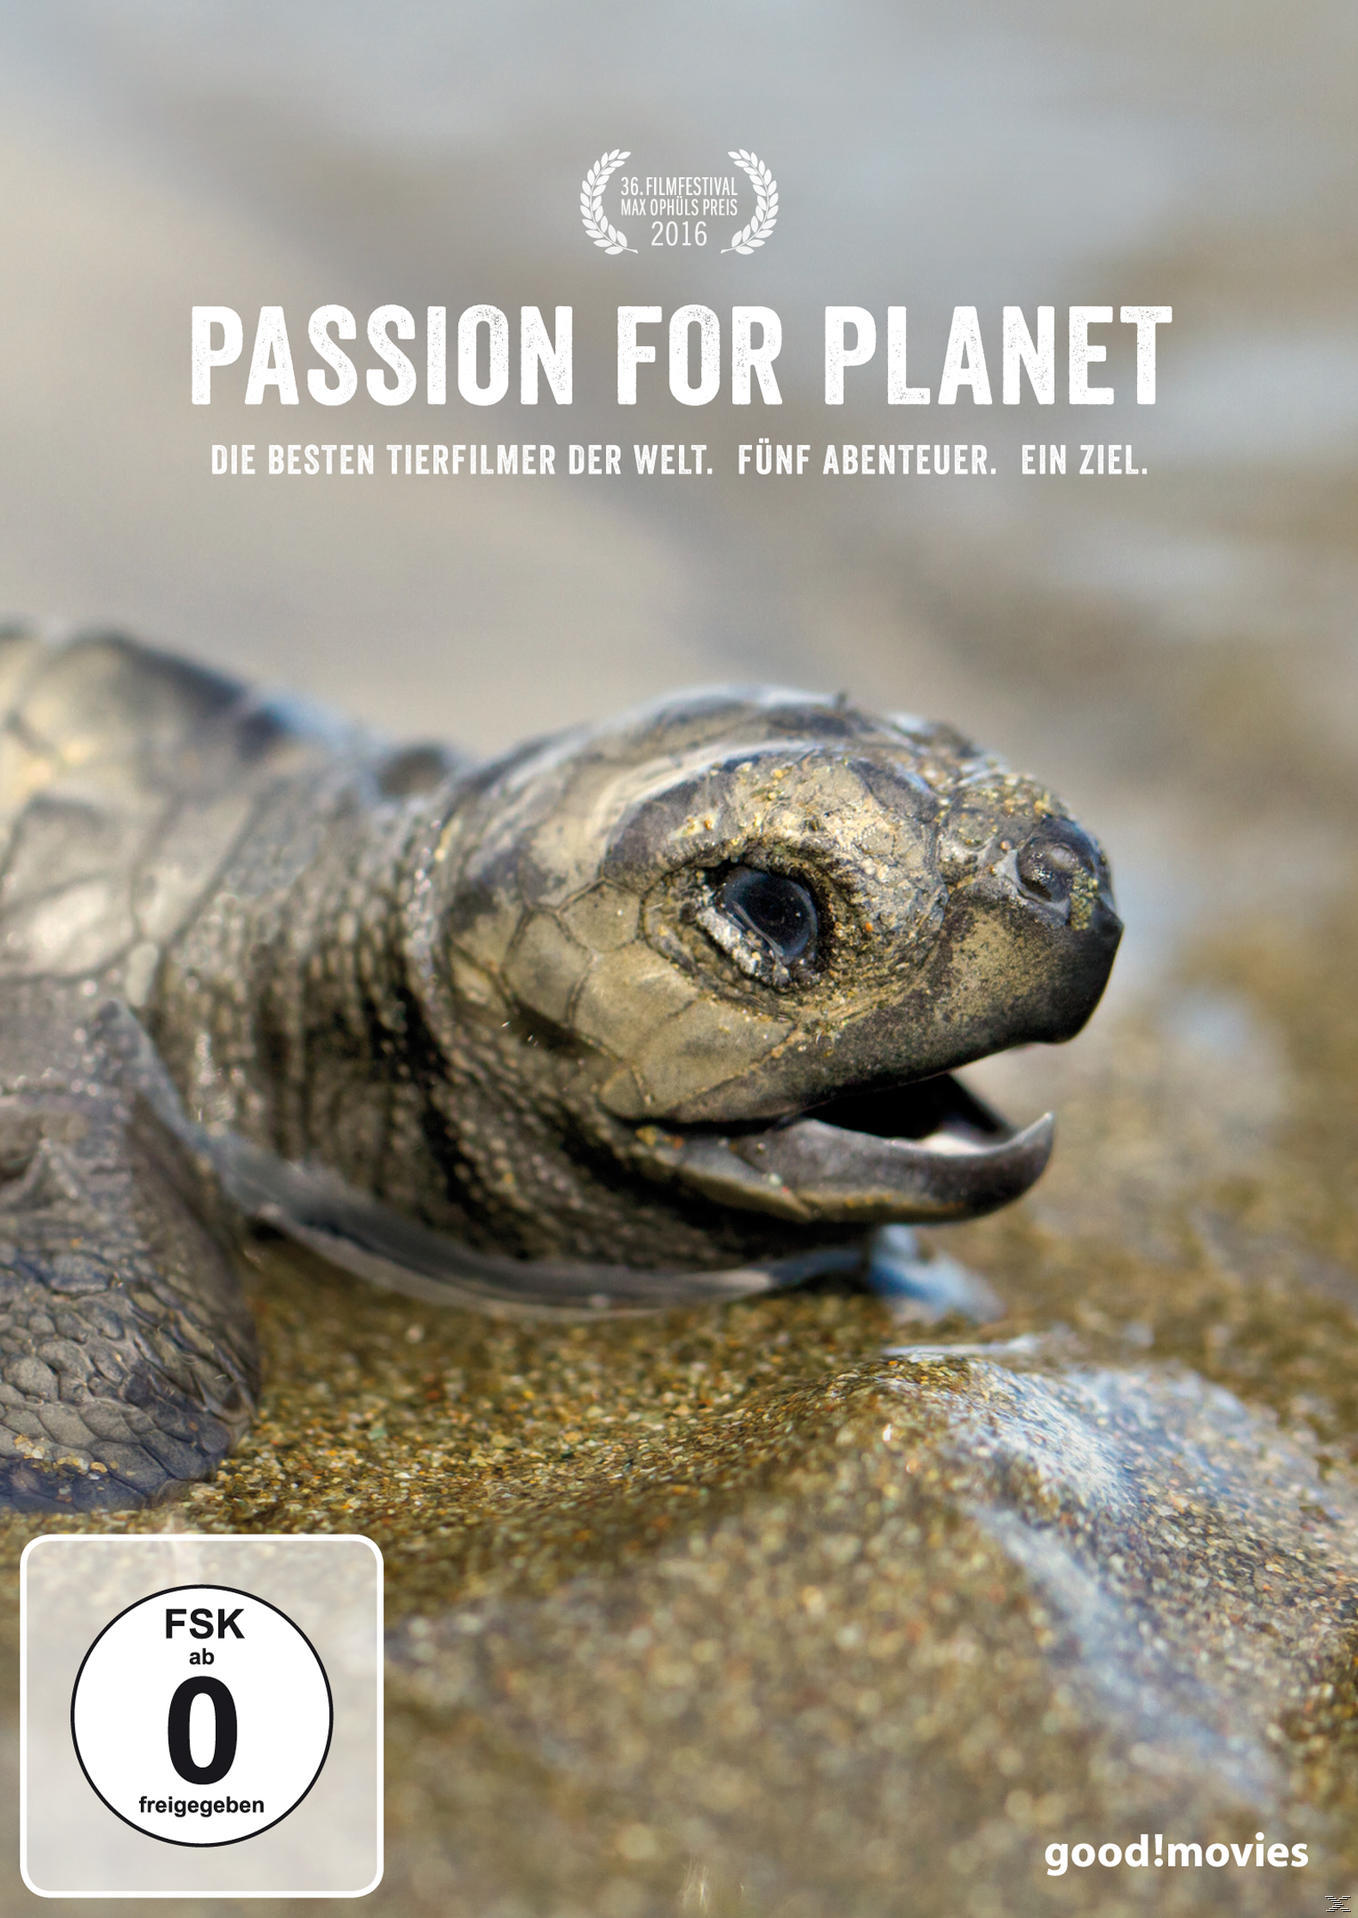 DVD for Planet Passion